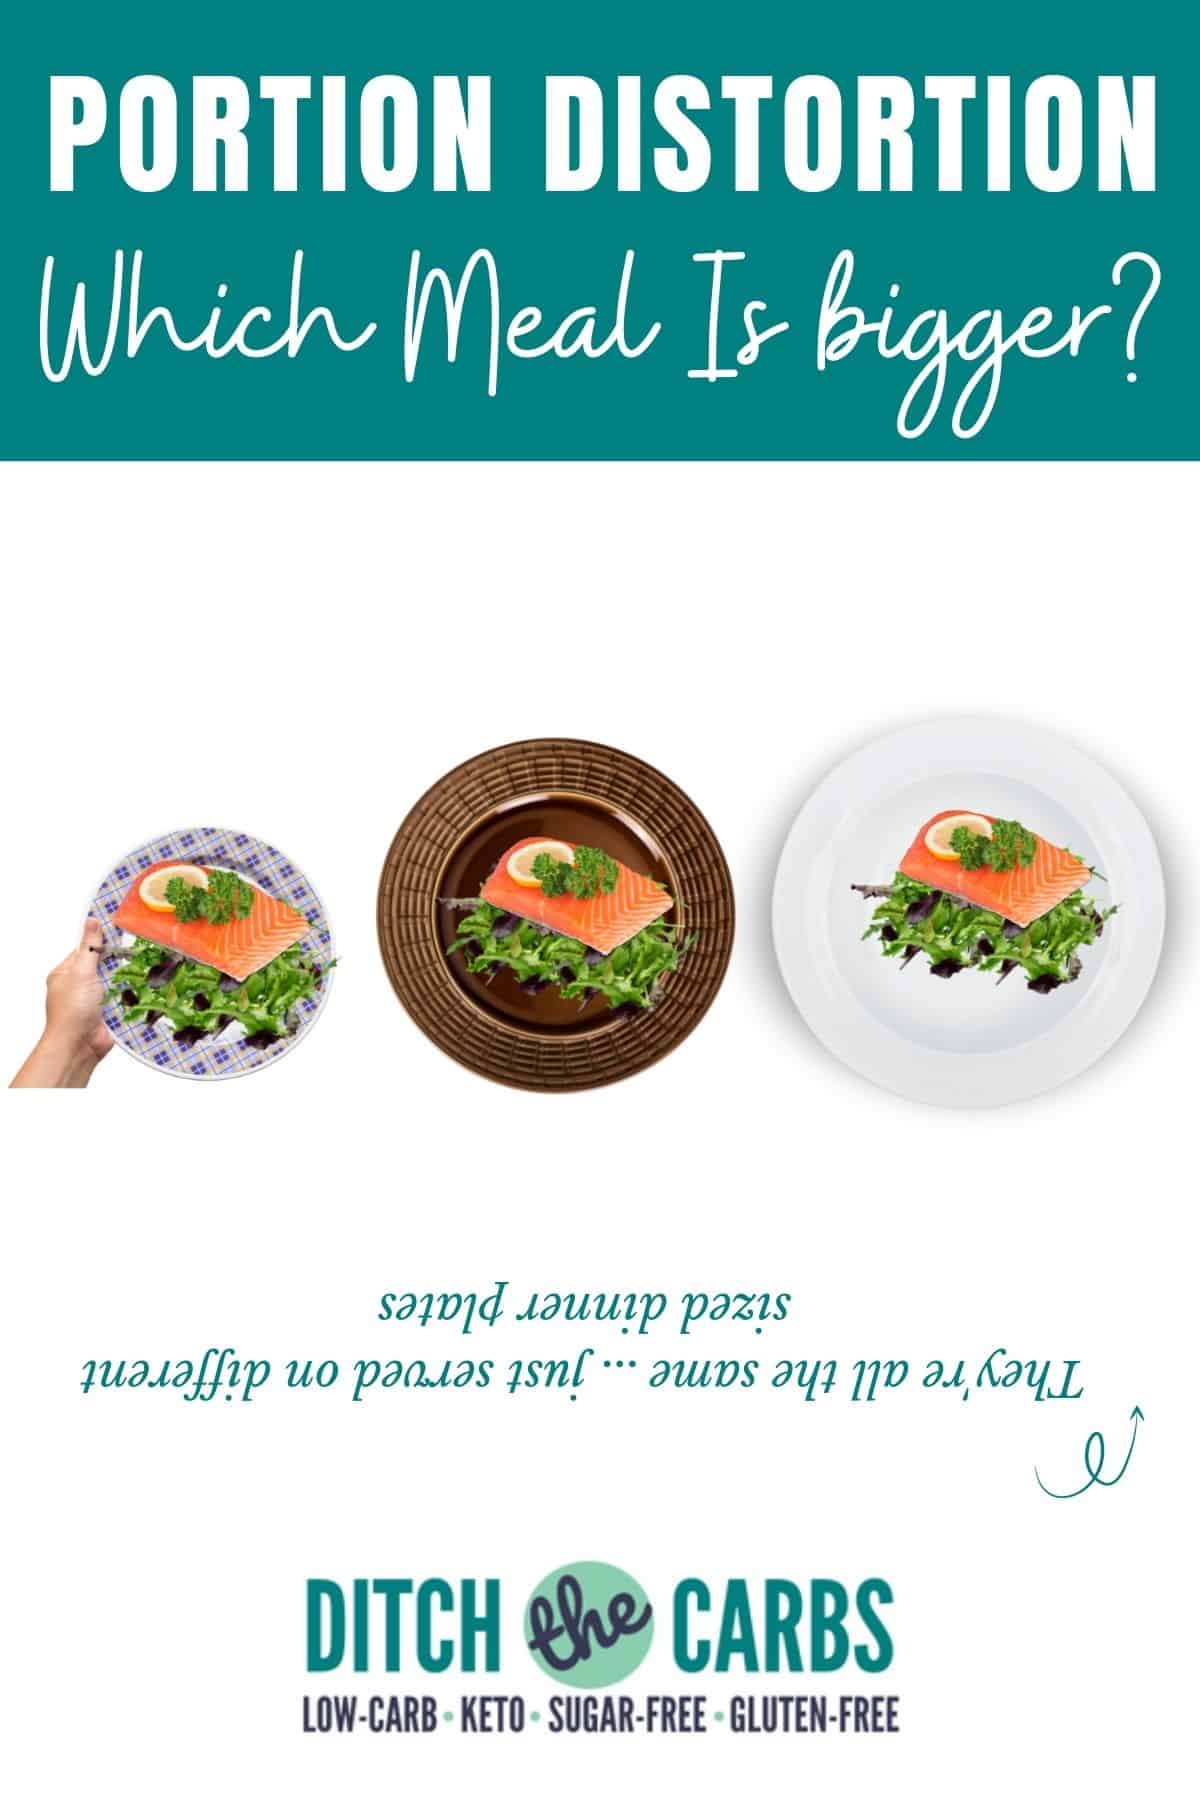 3 plates with food to demonstrate portion control